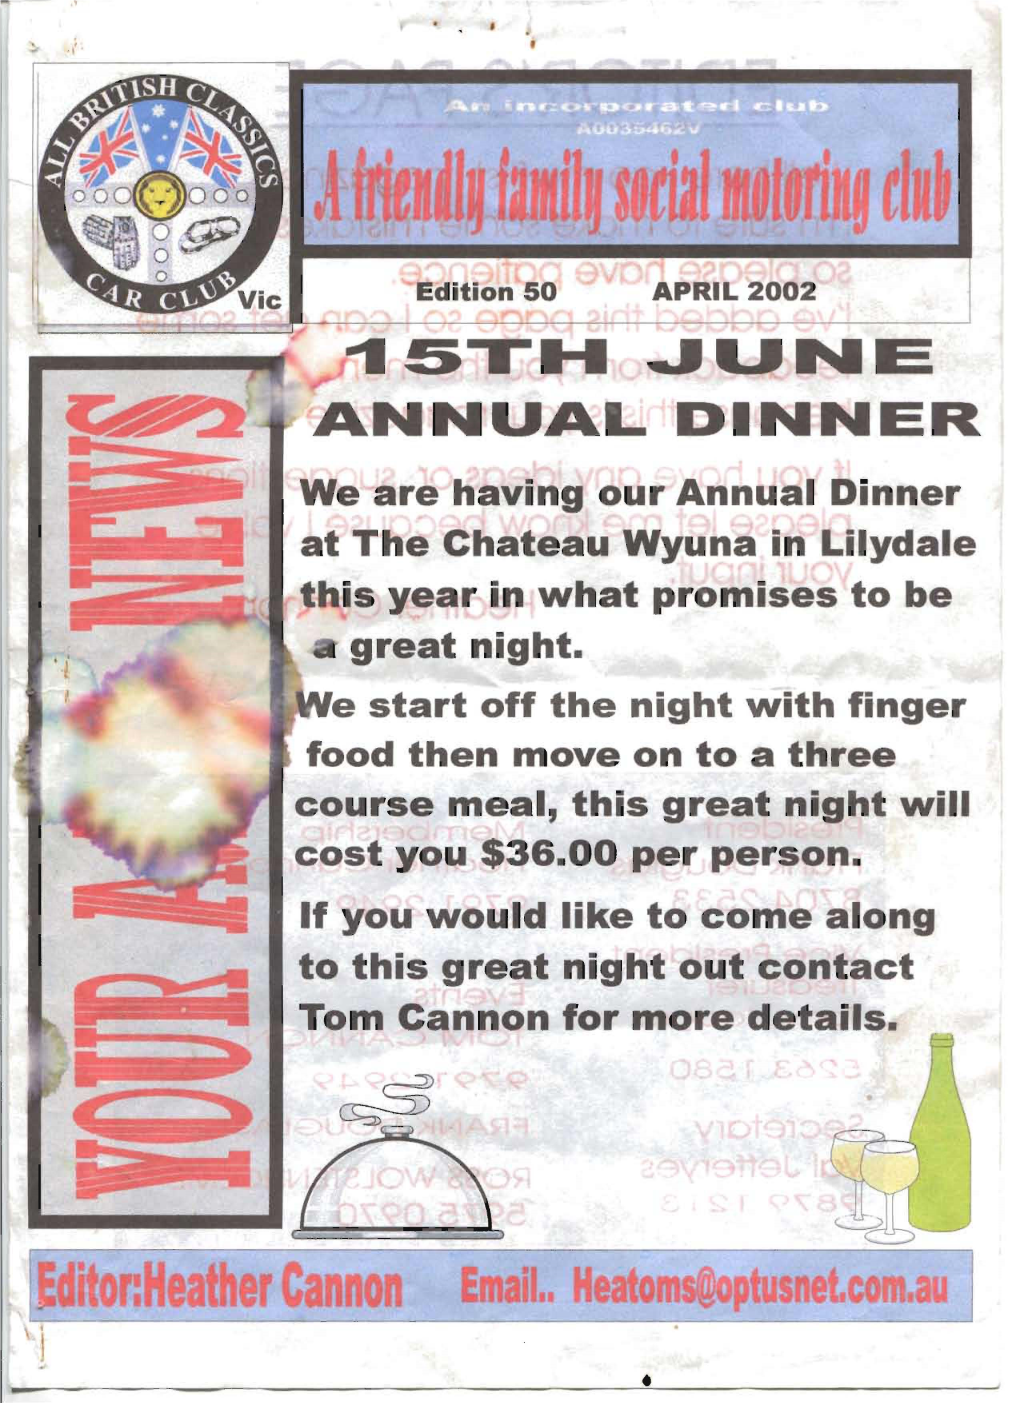 We Are Having Our Annual Dinner at He Chateau Wyuna in Ily a E T Is Year in What Promises to Be Great Night